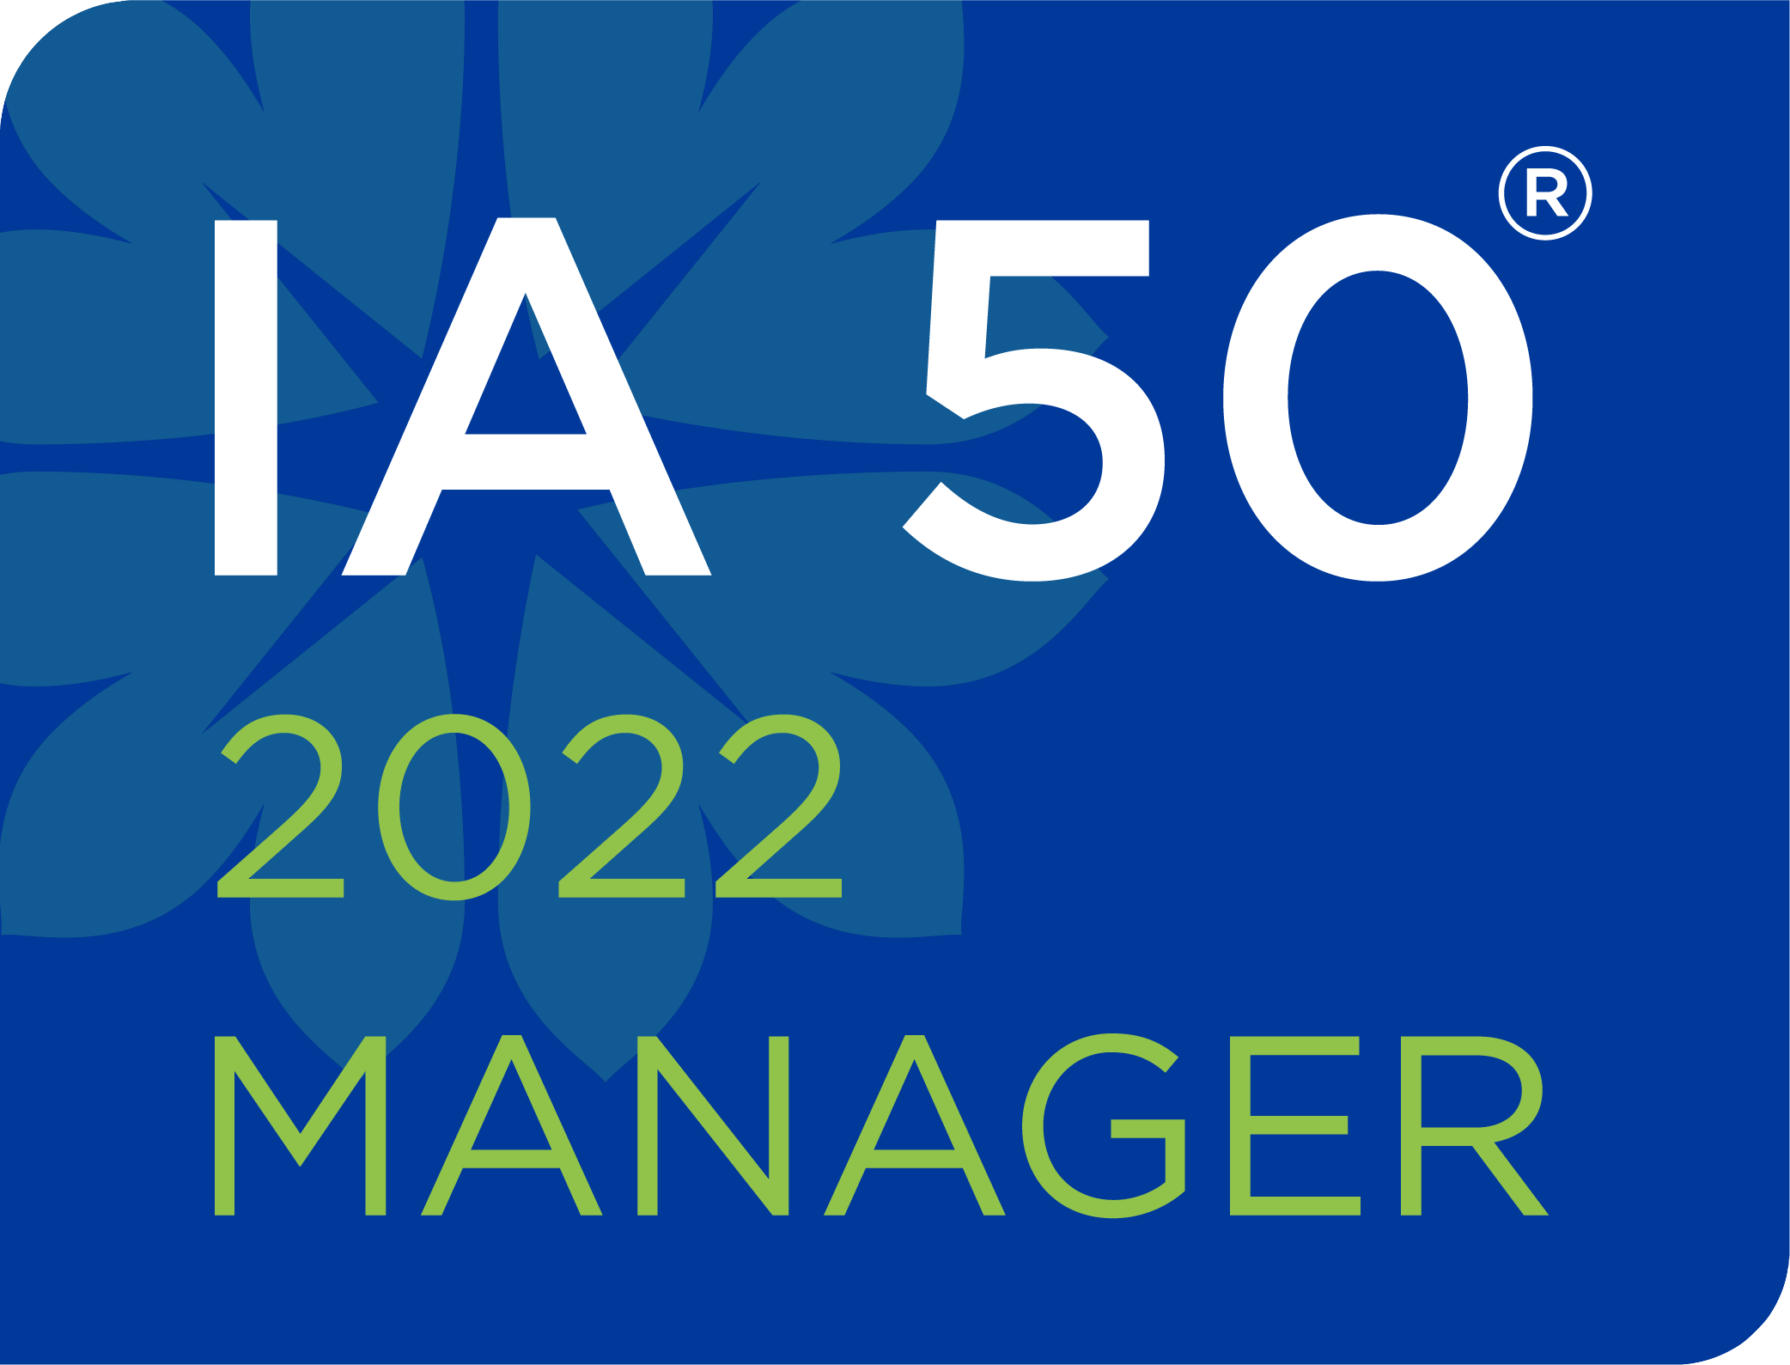 IA 50 2022 Fund Manager